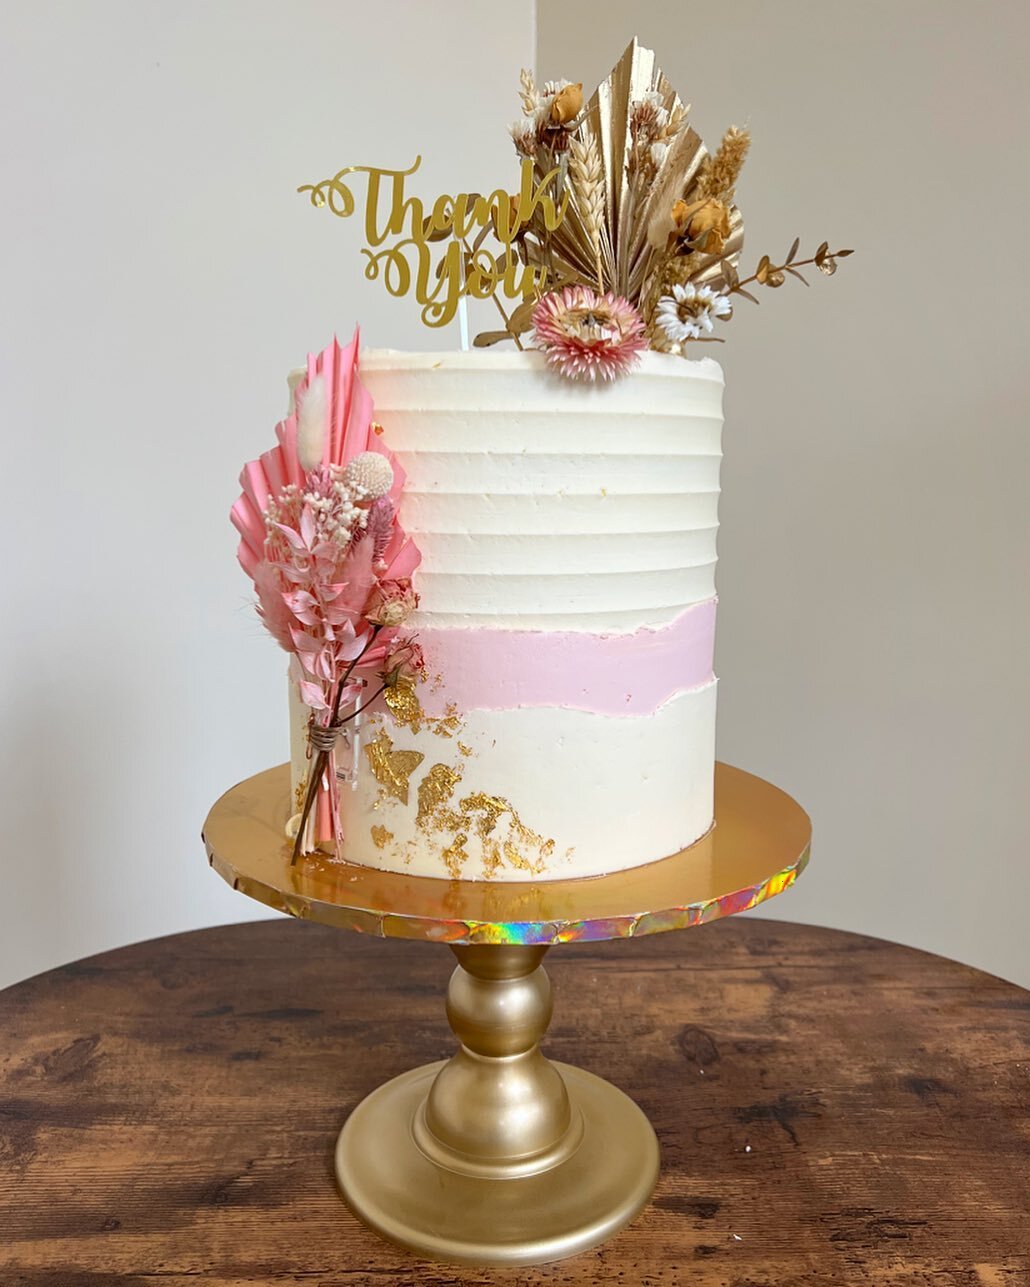 Dried blooms, scalloped buttercream &amp; gold leaf - what more could you want?